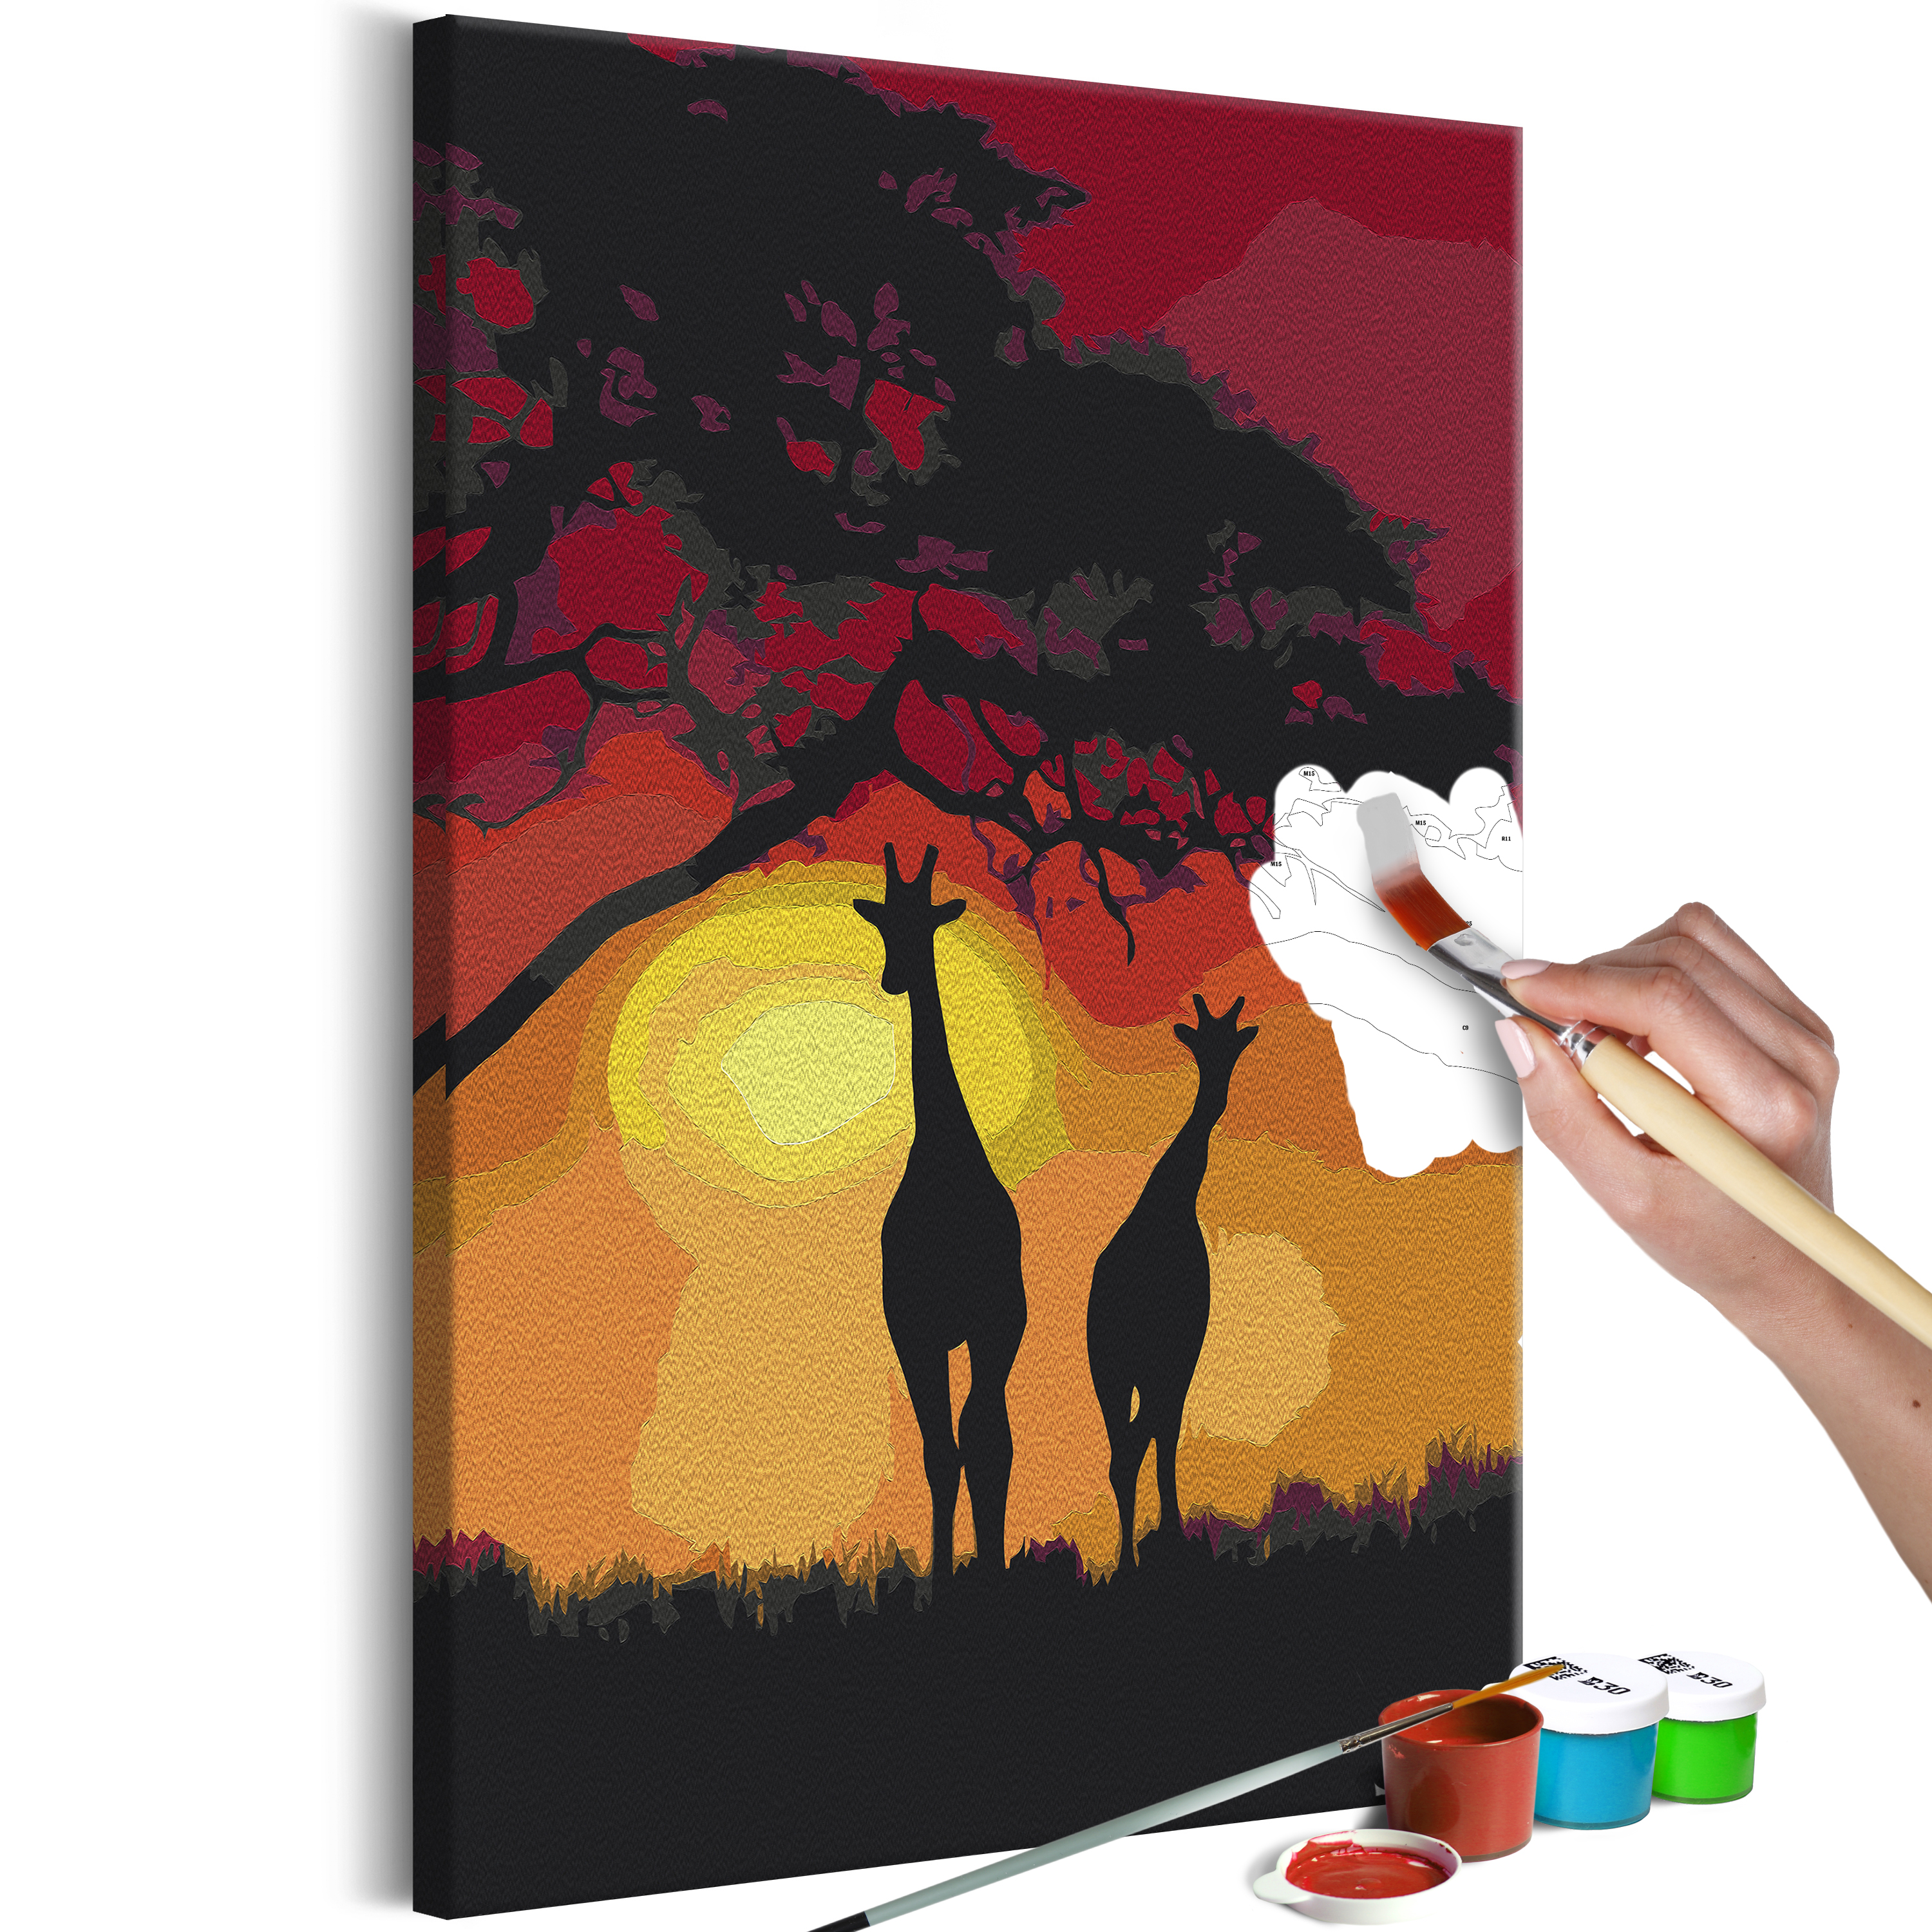 DIY canvas painting - Giraffes and Sunset - 40x60